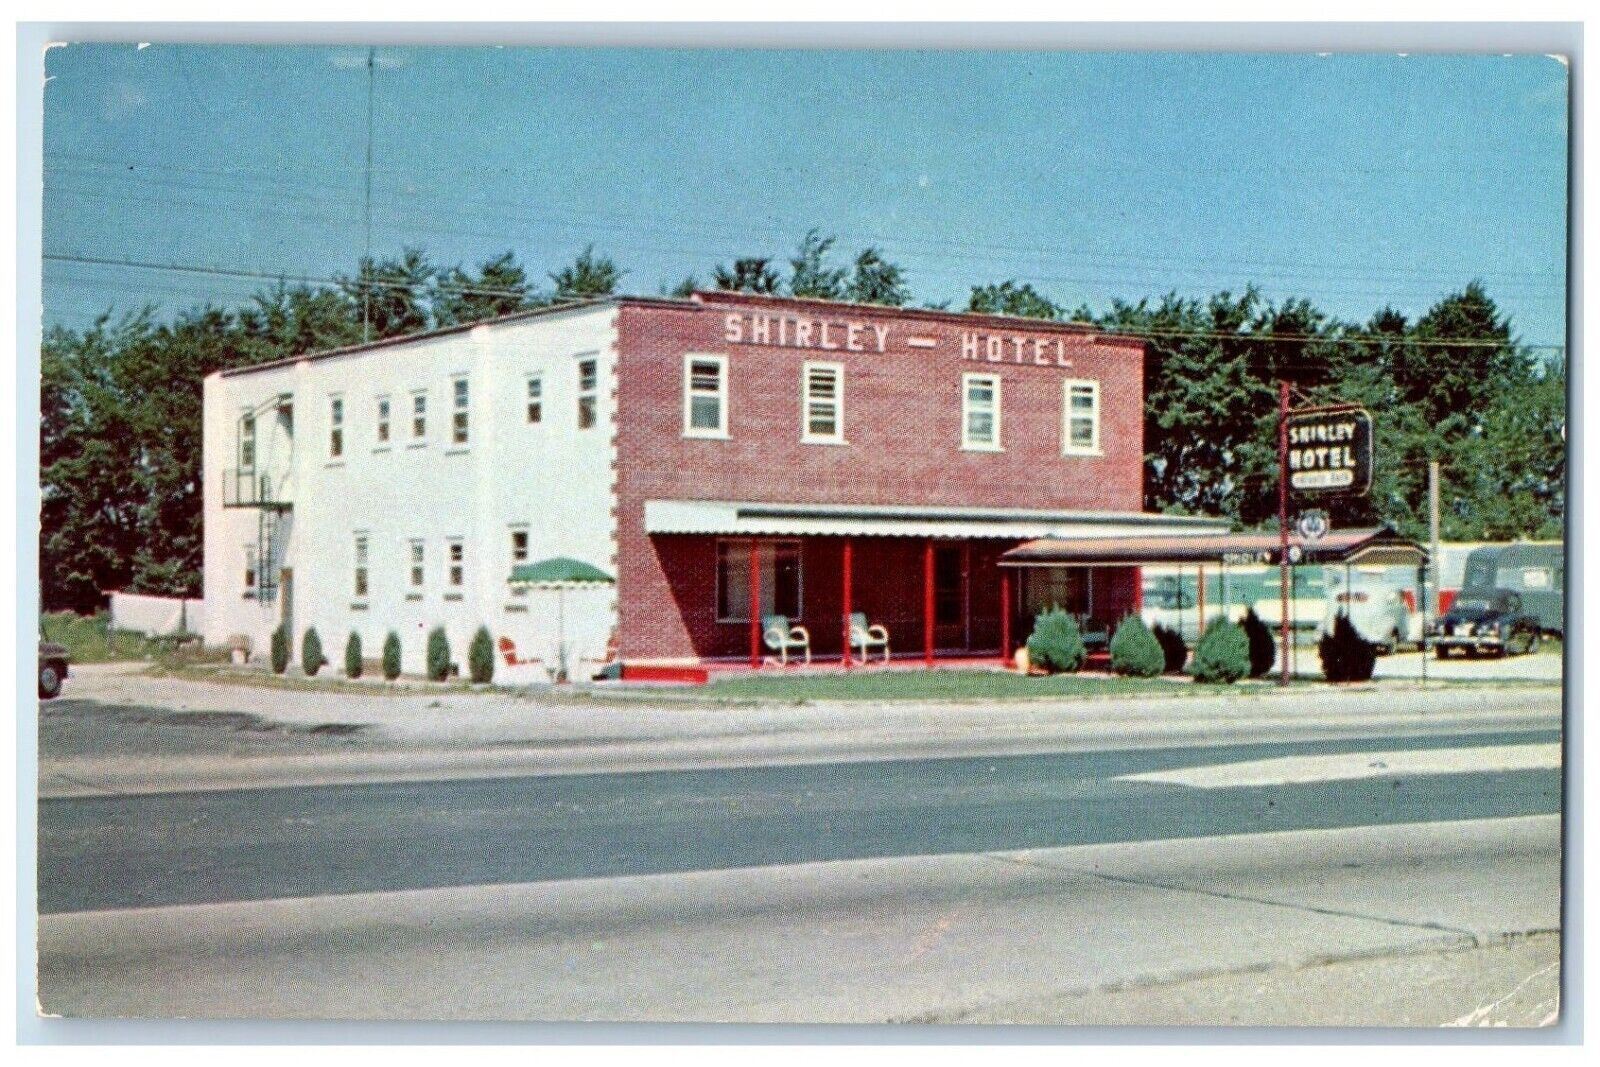 Shirley Hotel South Michigan Road On U.S. 31 South Bend Indiana IN Postcard